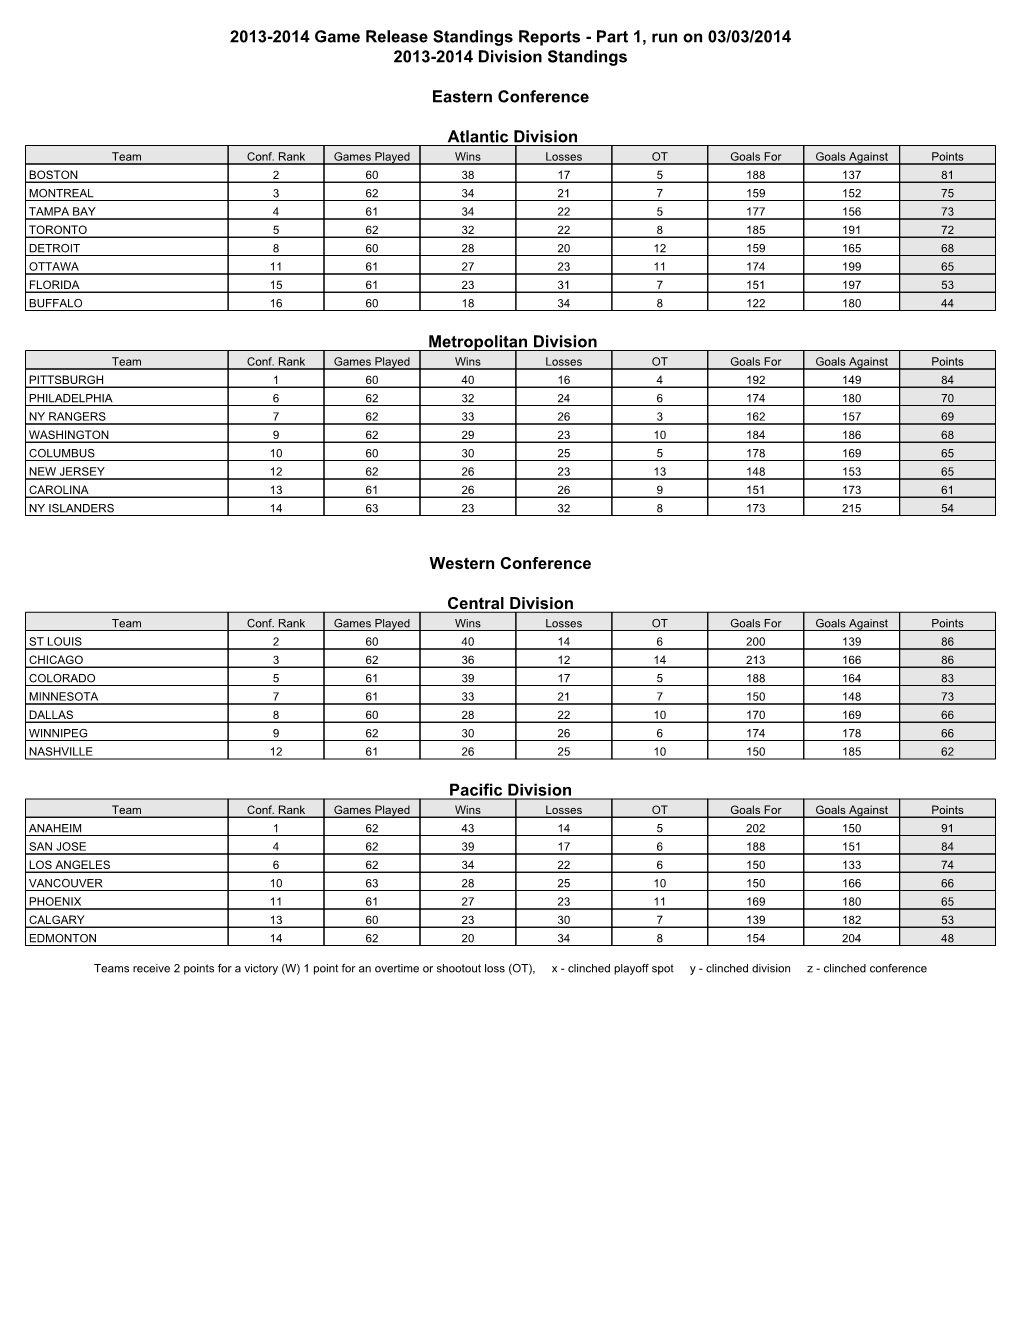 2013-2014 Game Release Standings Reports - Part 1, Run on 03/03/2014 2013-2014 Division Standings